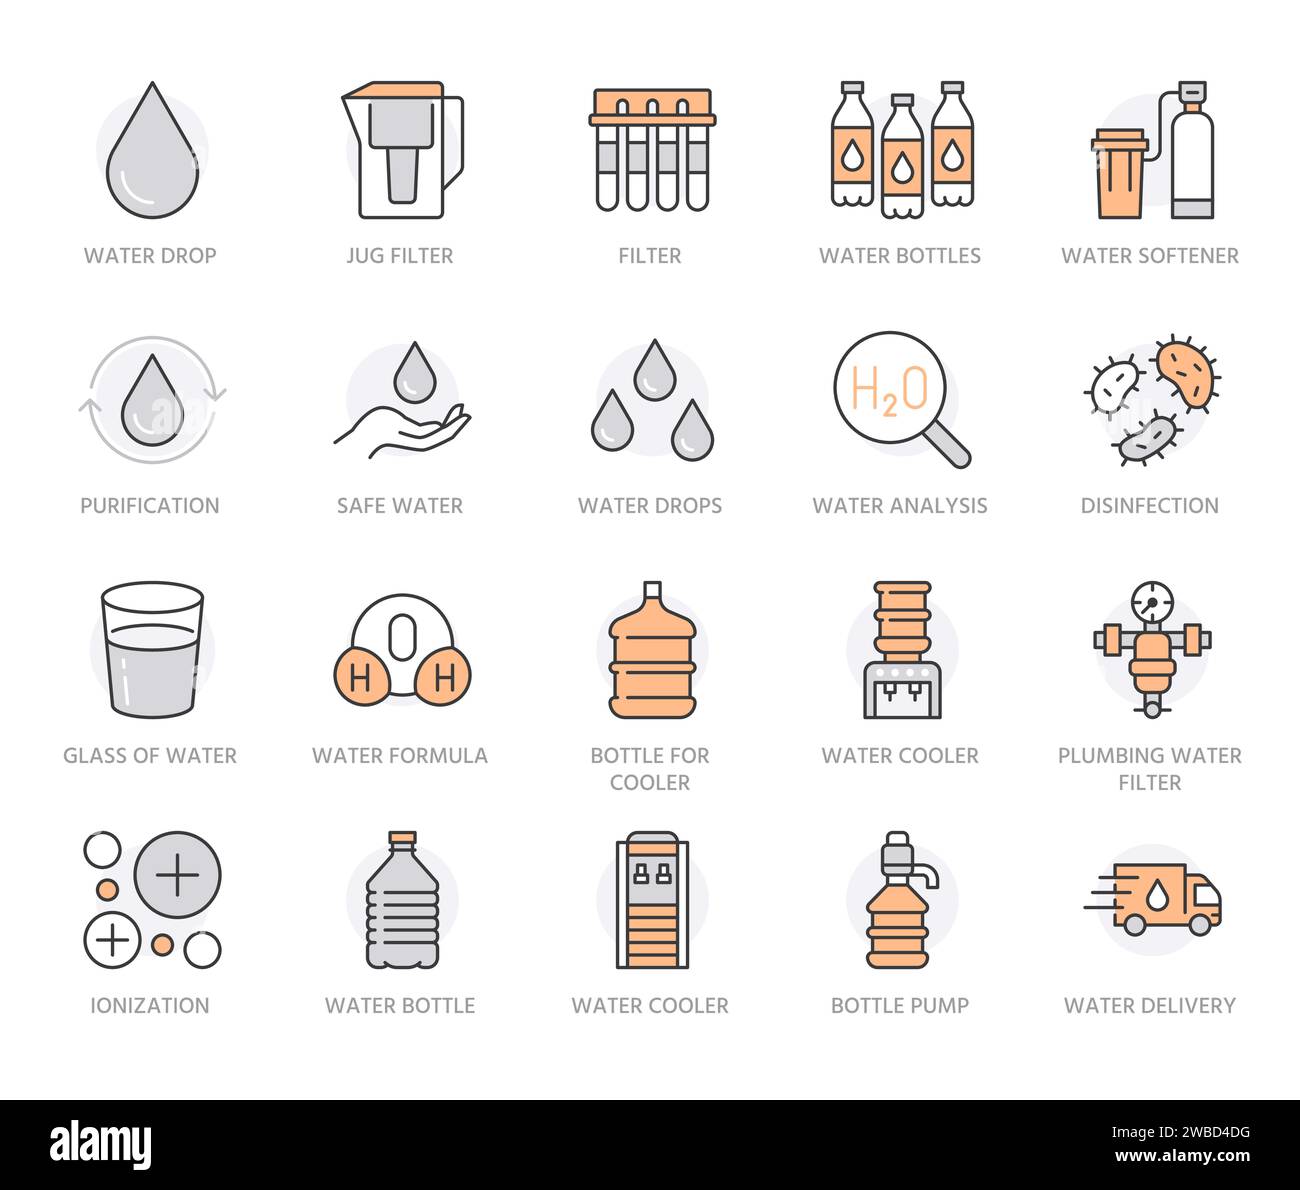 Water drop flat line icons set. Aqua filter, softener, ionization, disinfection, purification, glass, pump, drink vector illustrations. Thin signs for Stock Vector